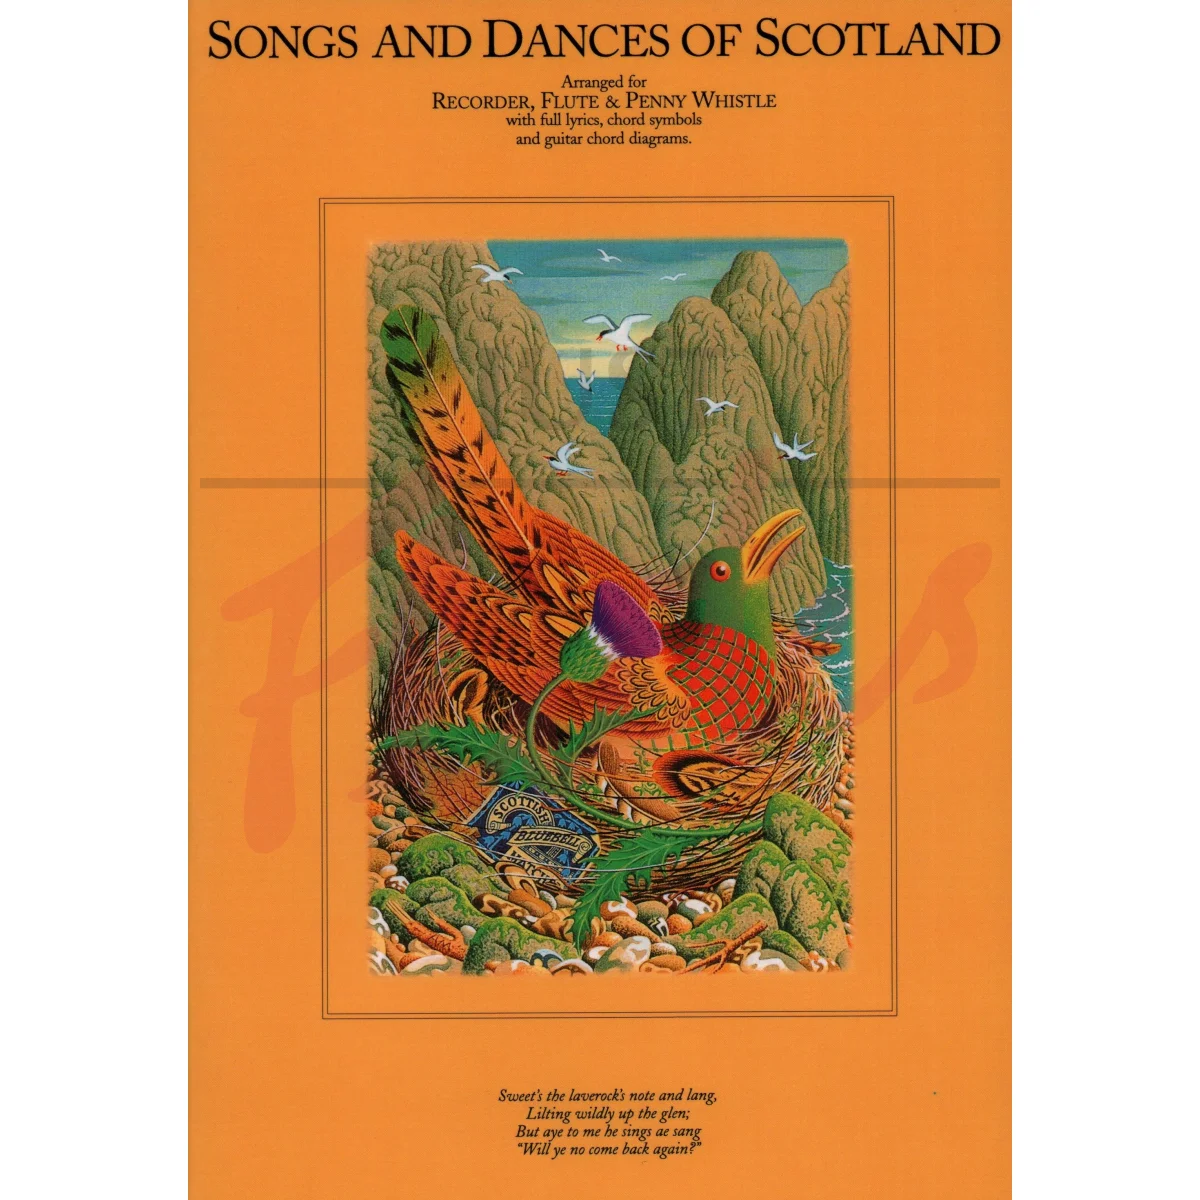 Songs and Dances of Scotland arranged for Recorder, Flute and Penny Whistle